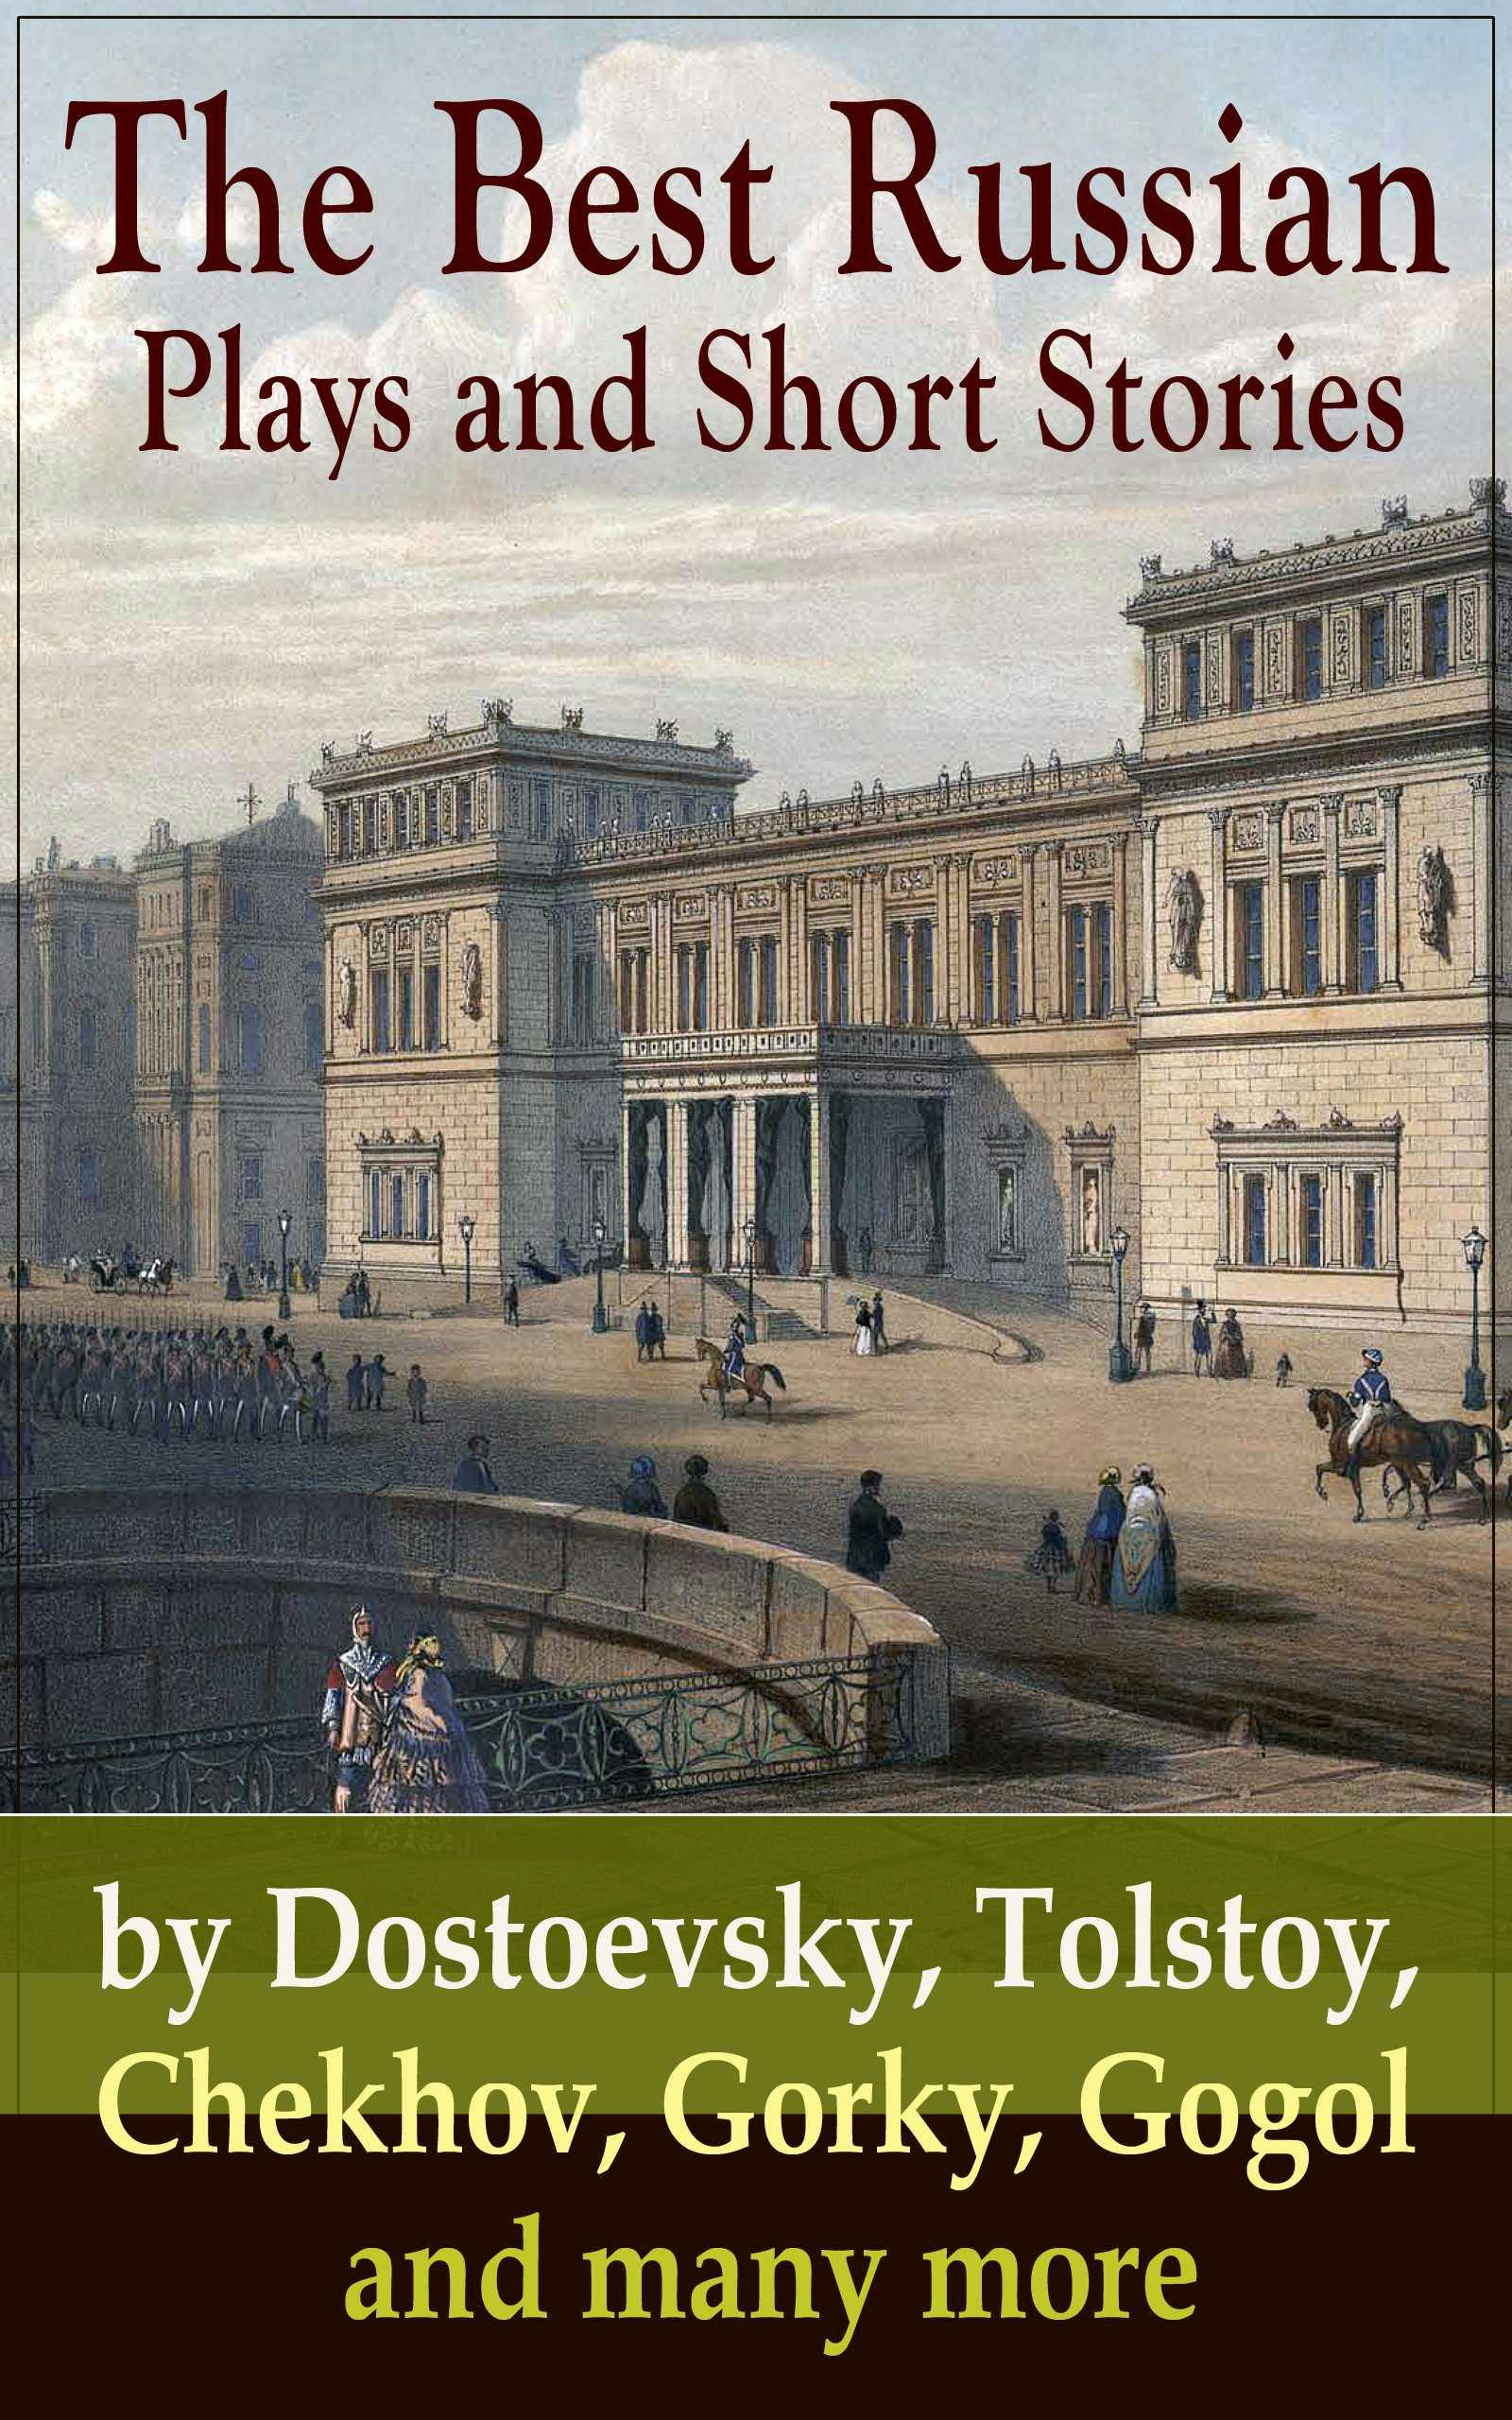 The Best Russian Plays and Short Stories by Dostoevsky, Tolstoy, Chekhov, Gorky, Gogol and many more: An All Time Favorite Collection from the Renowned Russian dramatists and Writers (Including Essays and Lectures on Russian Novelists) - M.Y. Saltykov, S.T. Semyonov, L.N. Andreyev, M.P. Artzybashev, William Lyon Phelps, Maxim Gorky, A.S. Pushkin, V.G. Korolenko, Anton Chekhov, K. Sologub, N.V. Gogol, F.M. Dostoyevsky, L.N. Tolstoy, A.I. Kuprin, I.S. Turgenev, V.N. Garshin, I.N. Potapenko